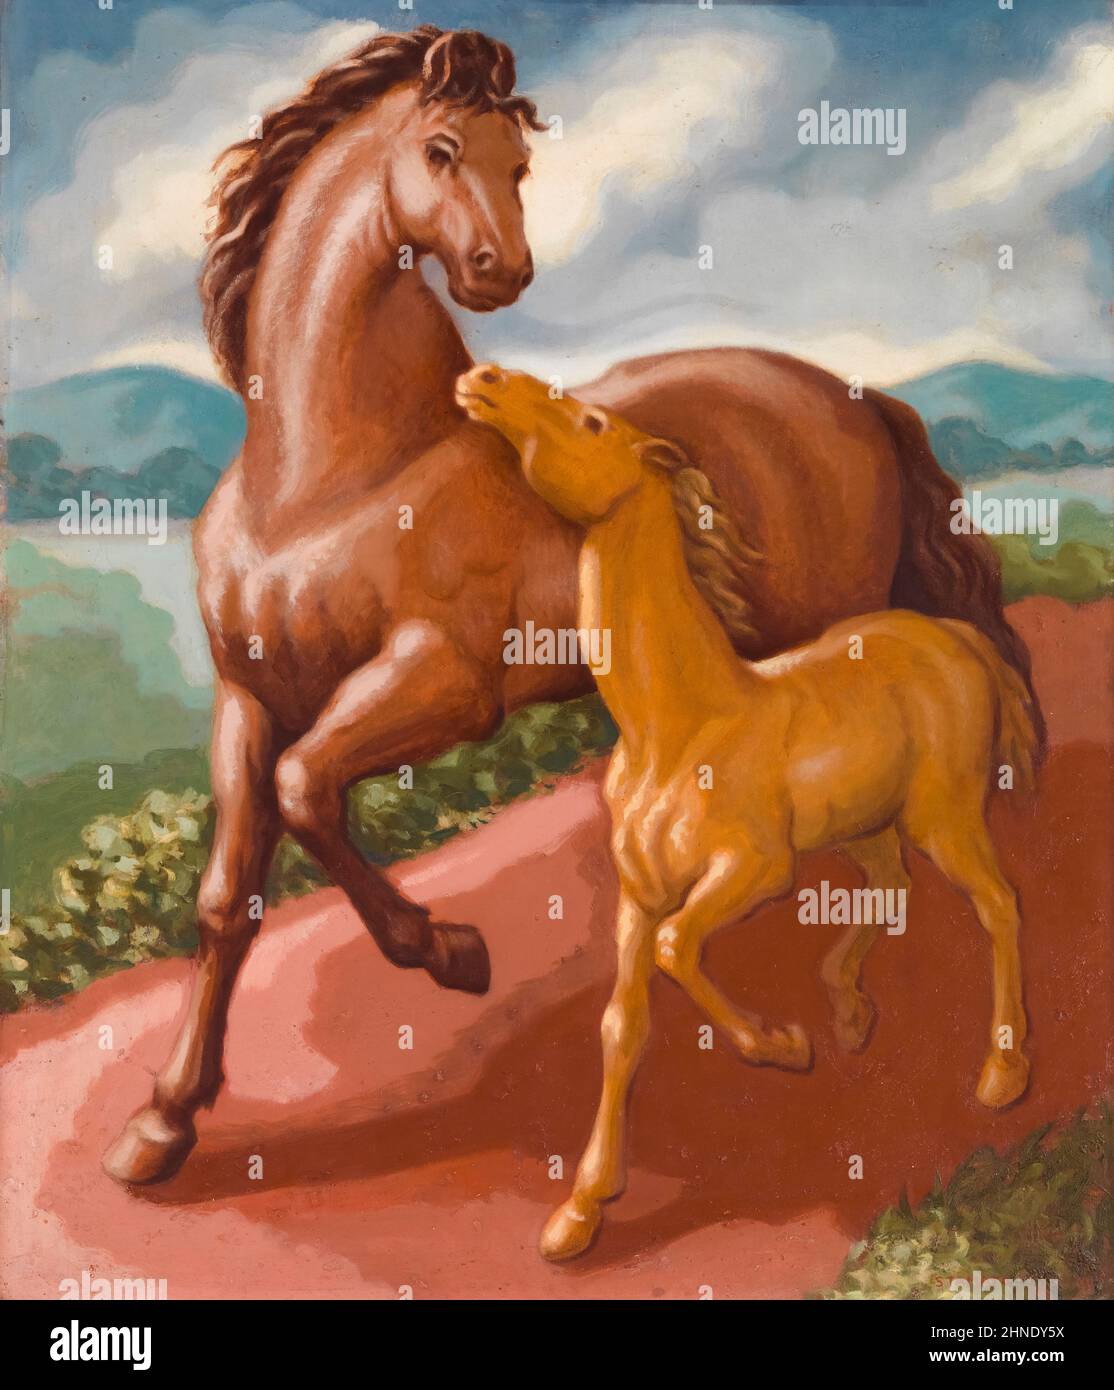 Frank Stamato, Horse painting, Filly and Colt, (Horses), painting, oil on canvas, 1934 New Deal art Stock Photo